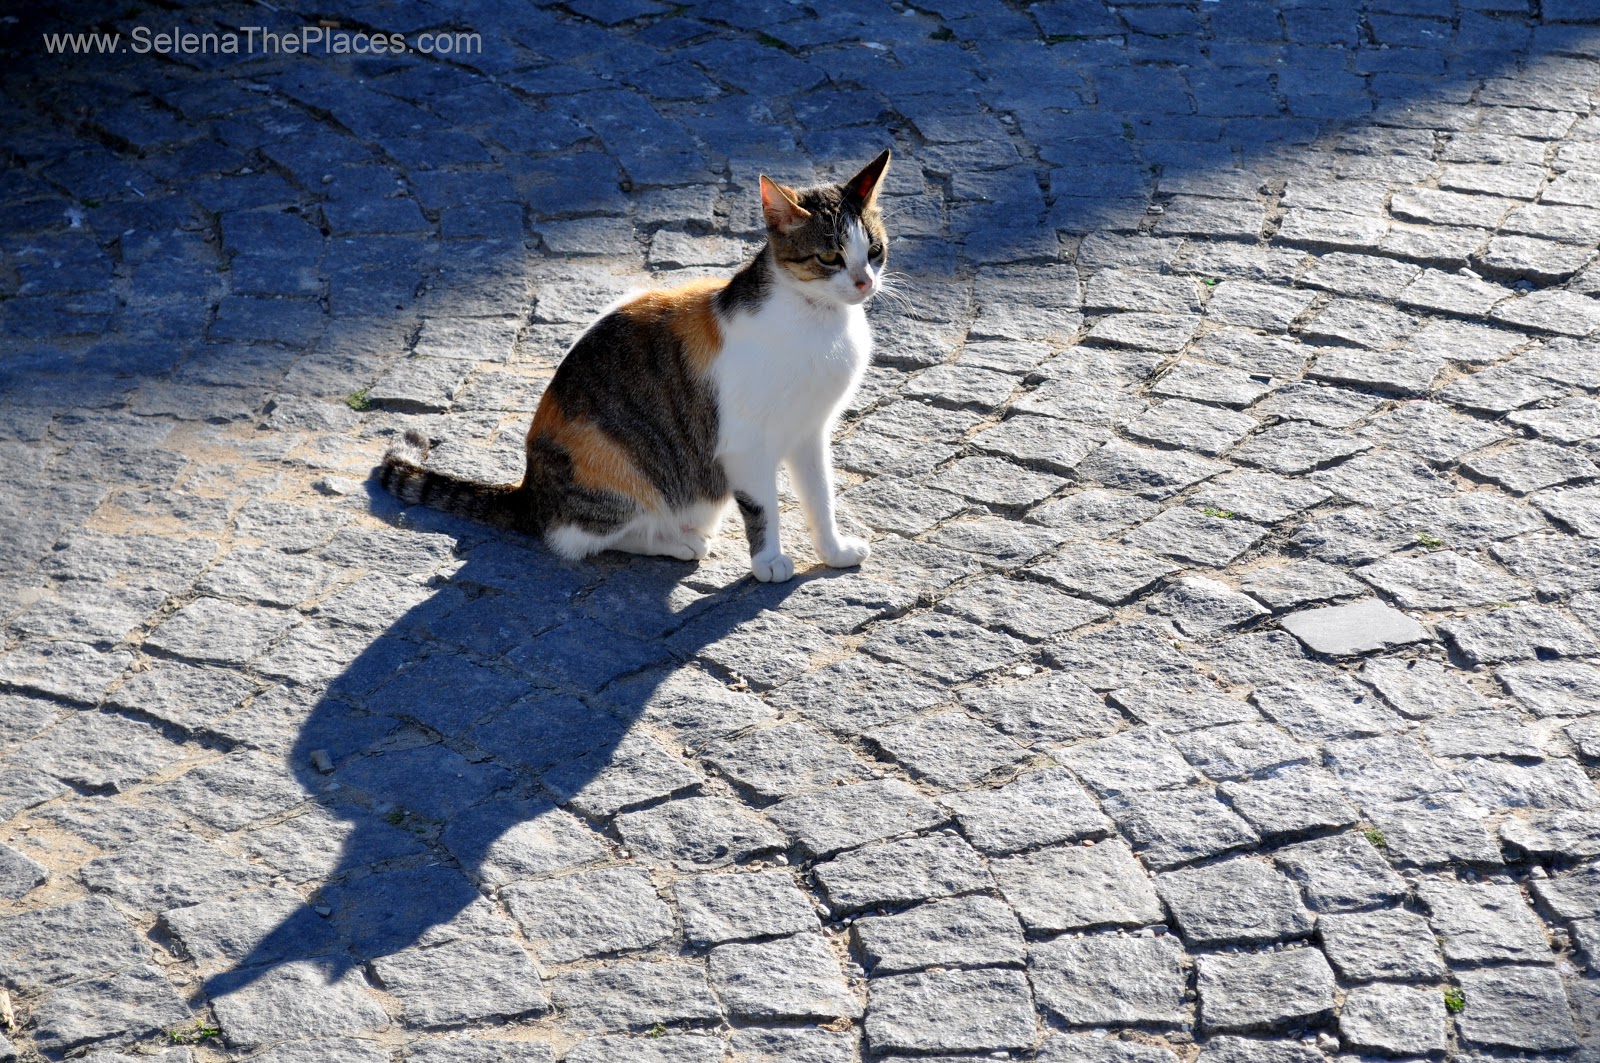 Cats of Morocco